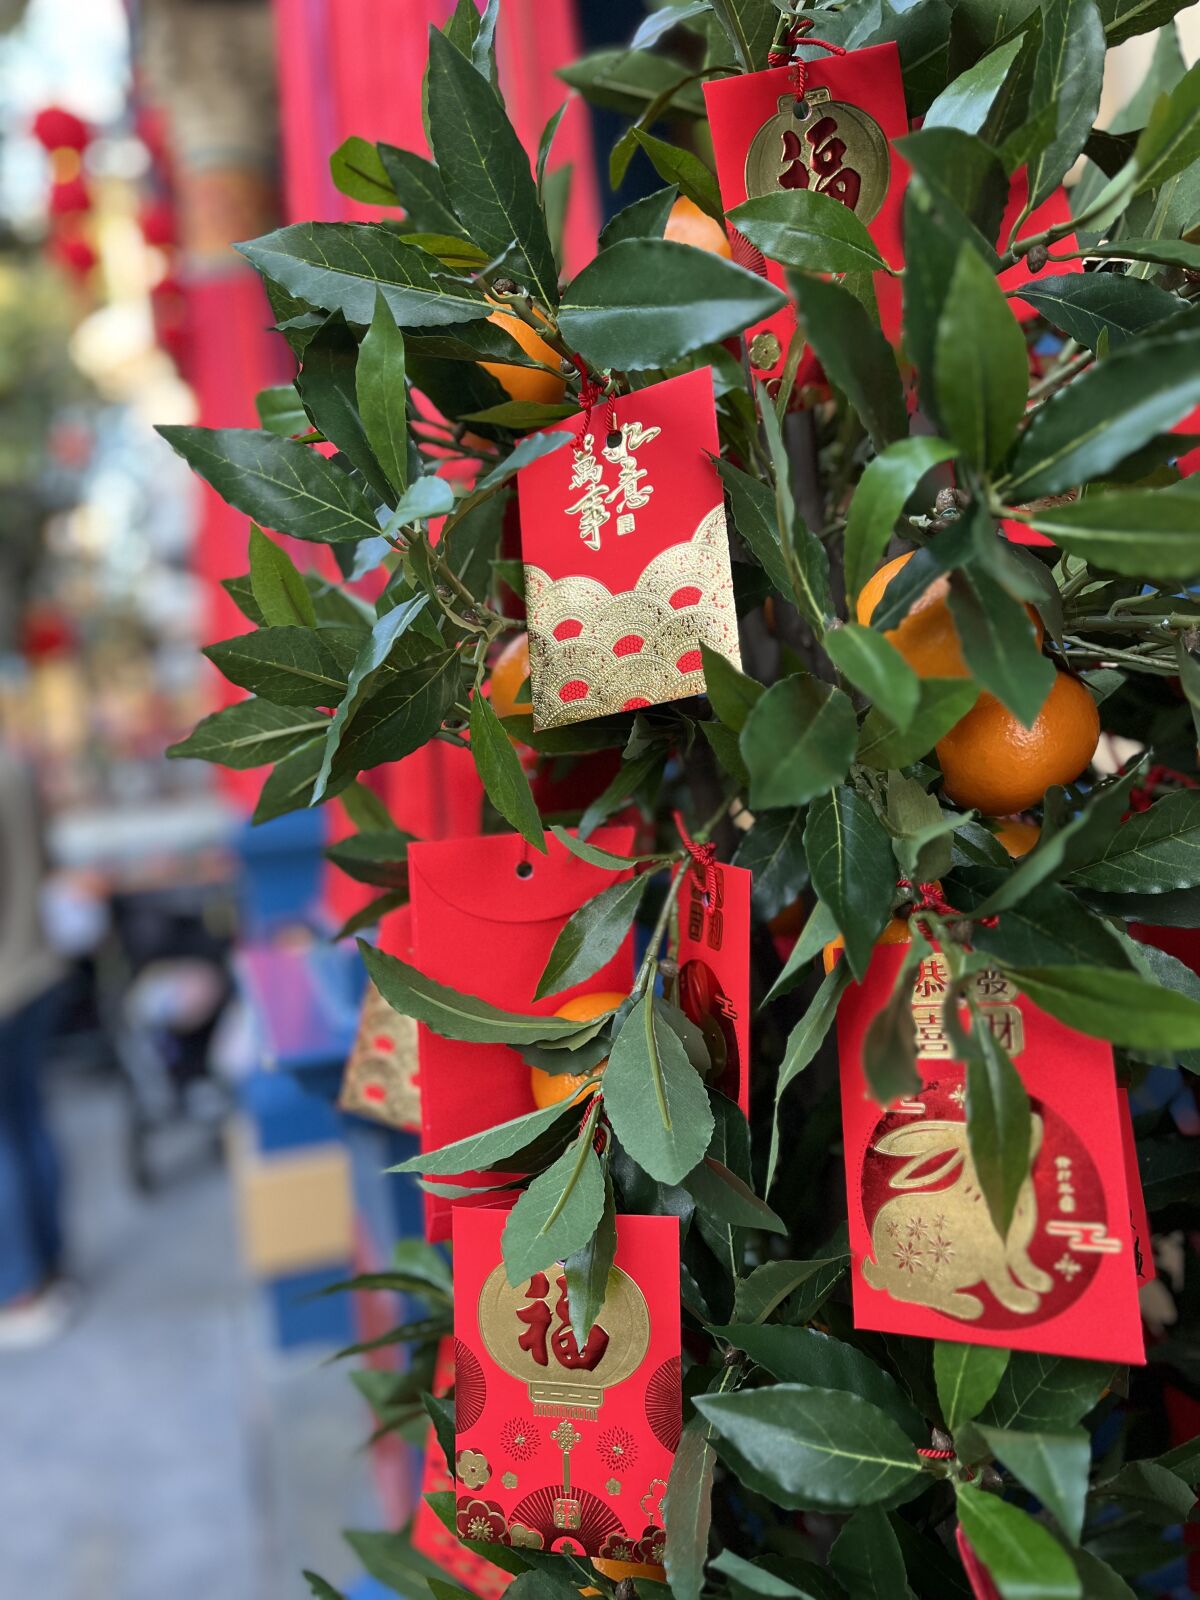 Decorations at California Adventure highlight the tradition of lucky red envelopes for Lunar New Year.